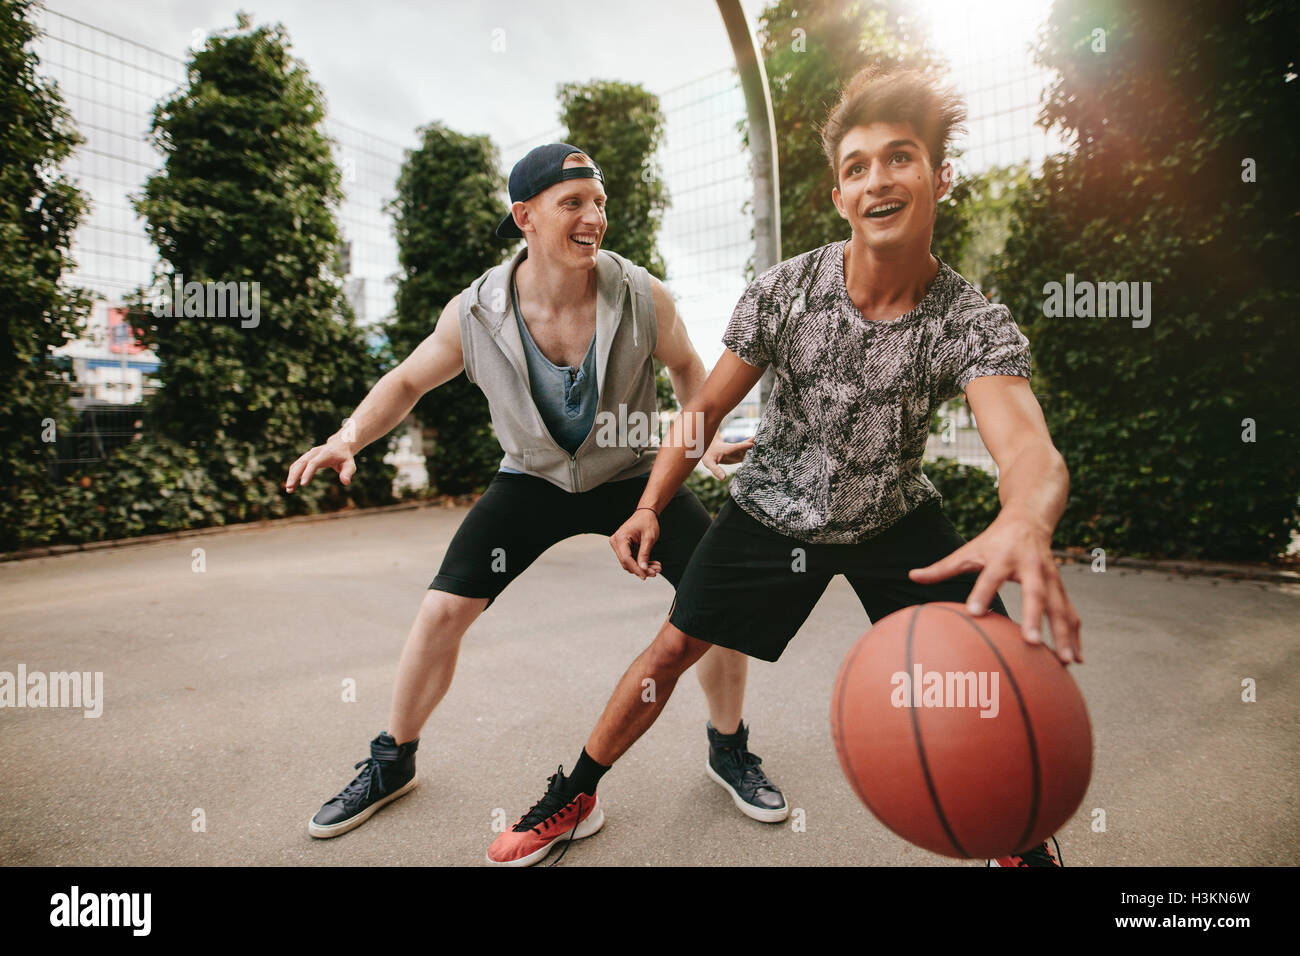 Two young friends playing basketball and having fun. Streetball players having a game of basketball on court outdoors. Stock Photo